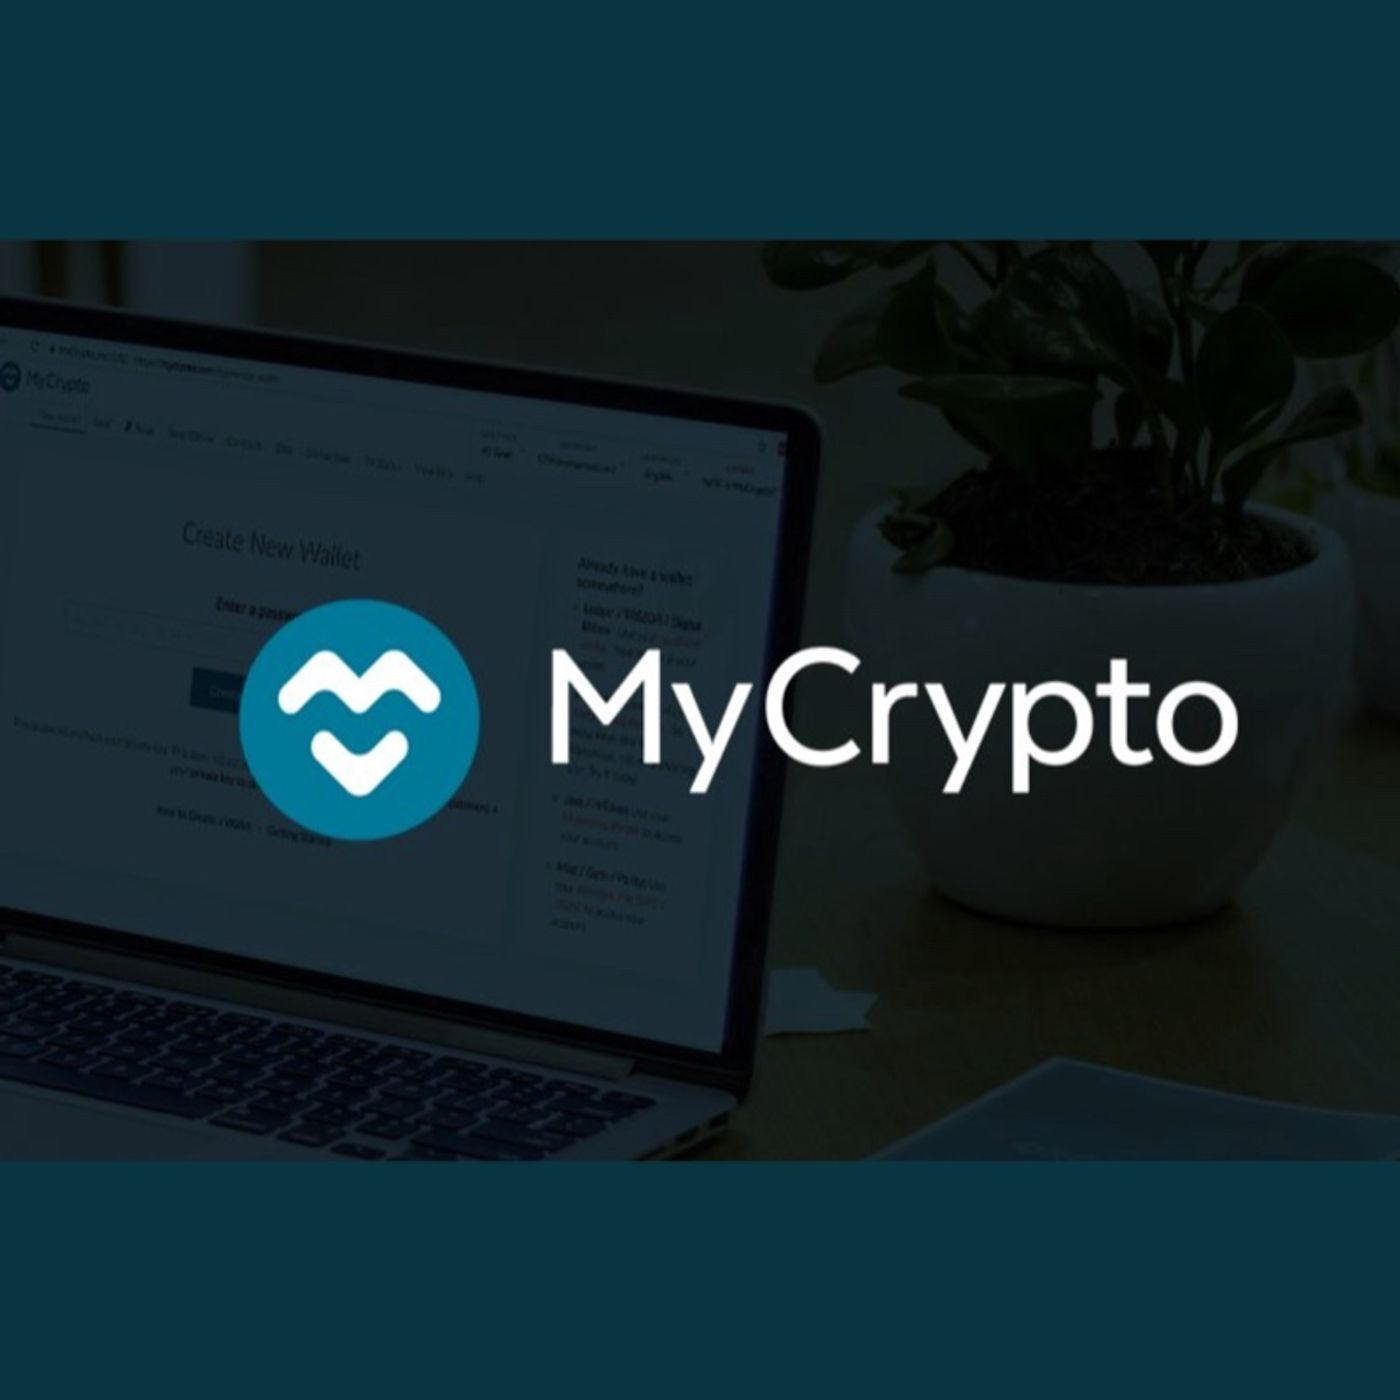 Jordan Spence Chief Marketing Officer at Mycrypto Explains Private Keys and Cold Storage